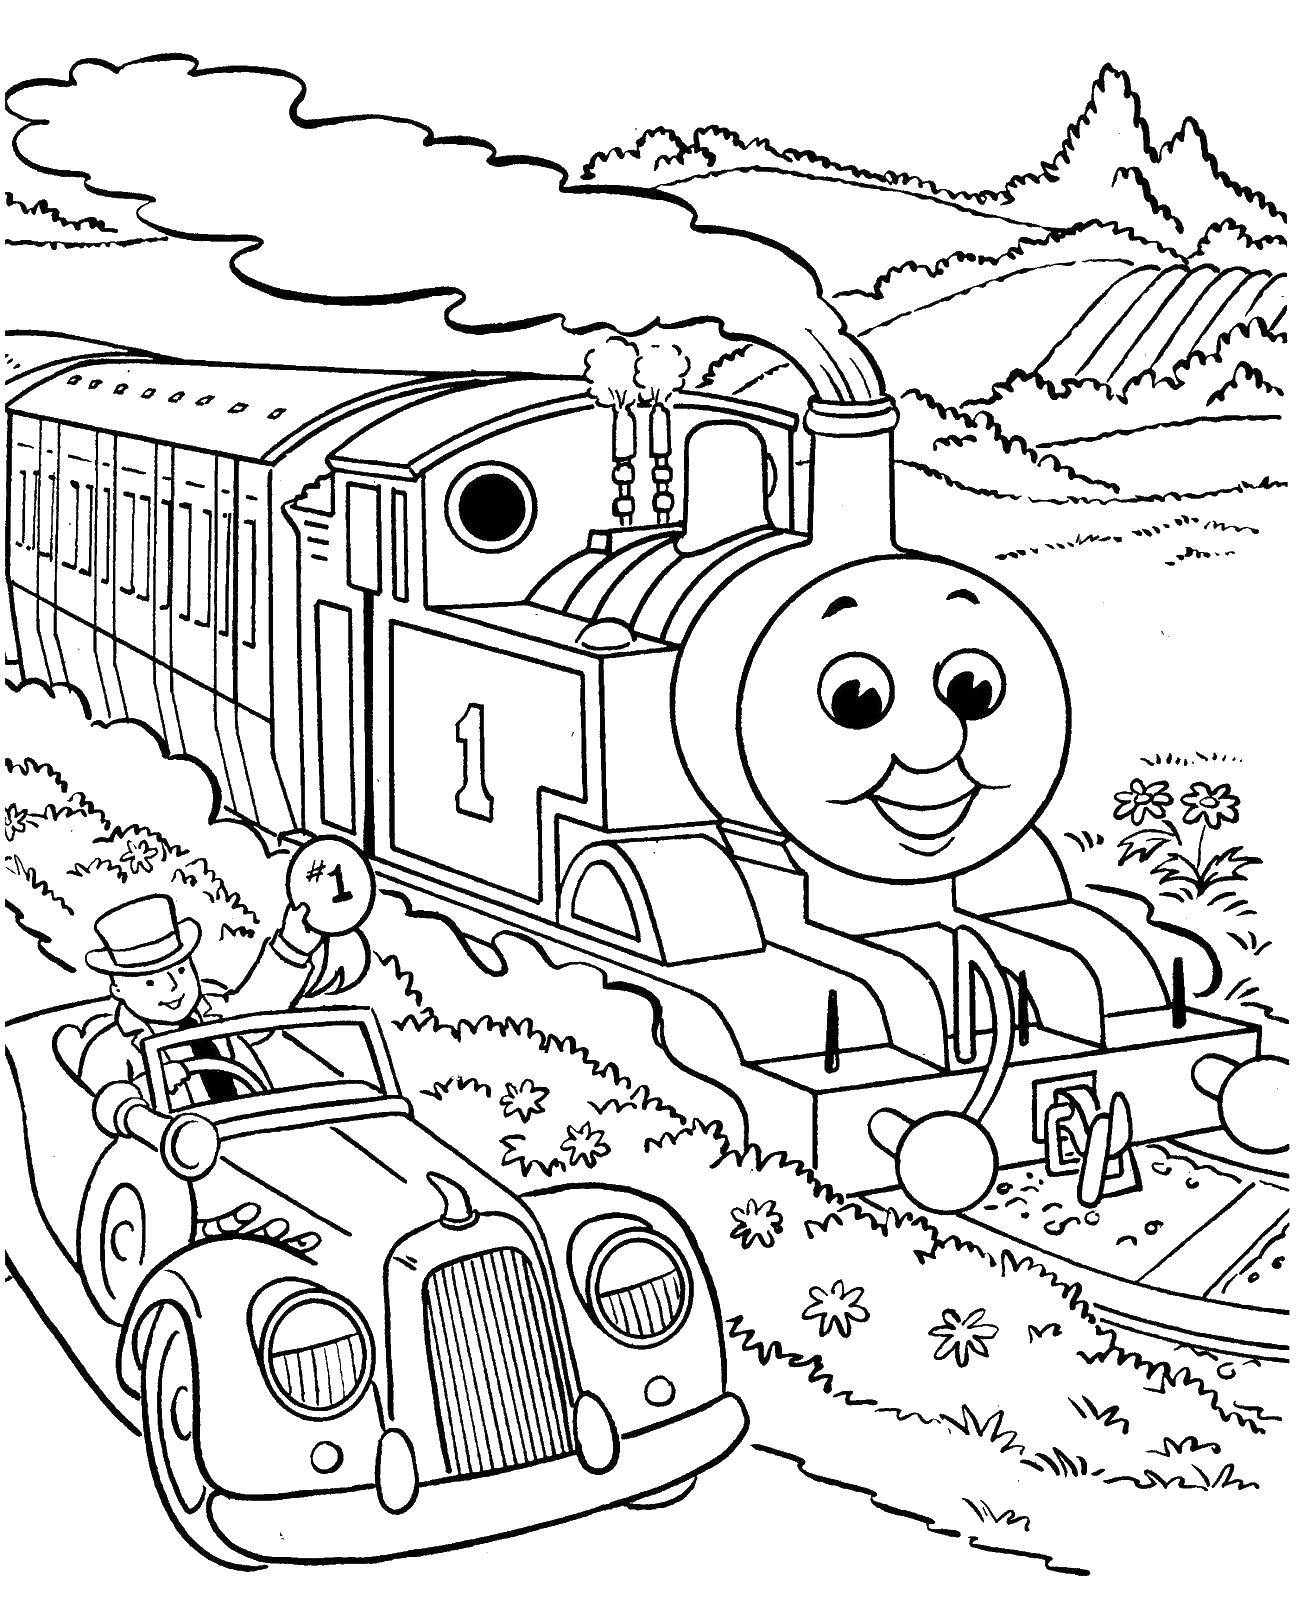 Coloring Thomas the tank engine got the first place. Category cartoons. Tags:  locomotive, Thomas.